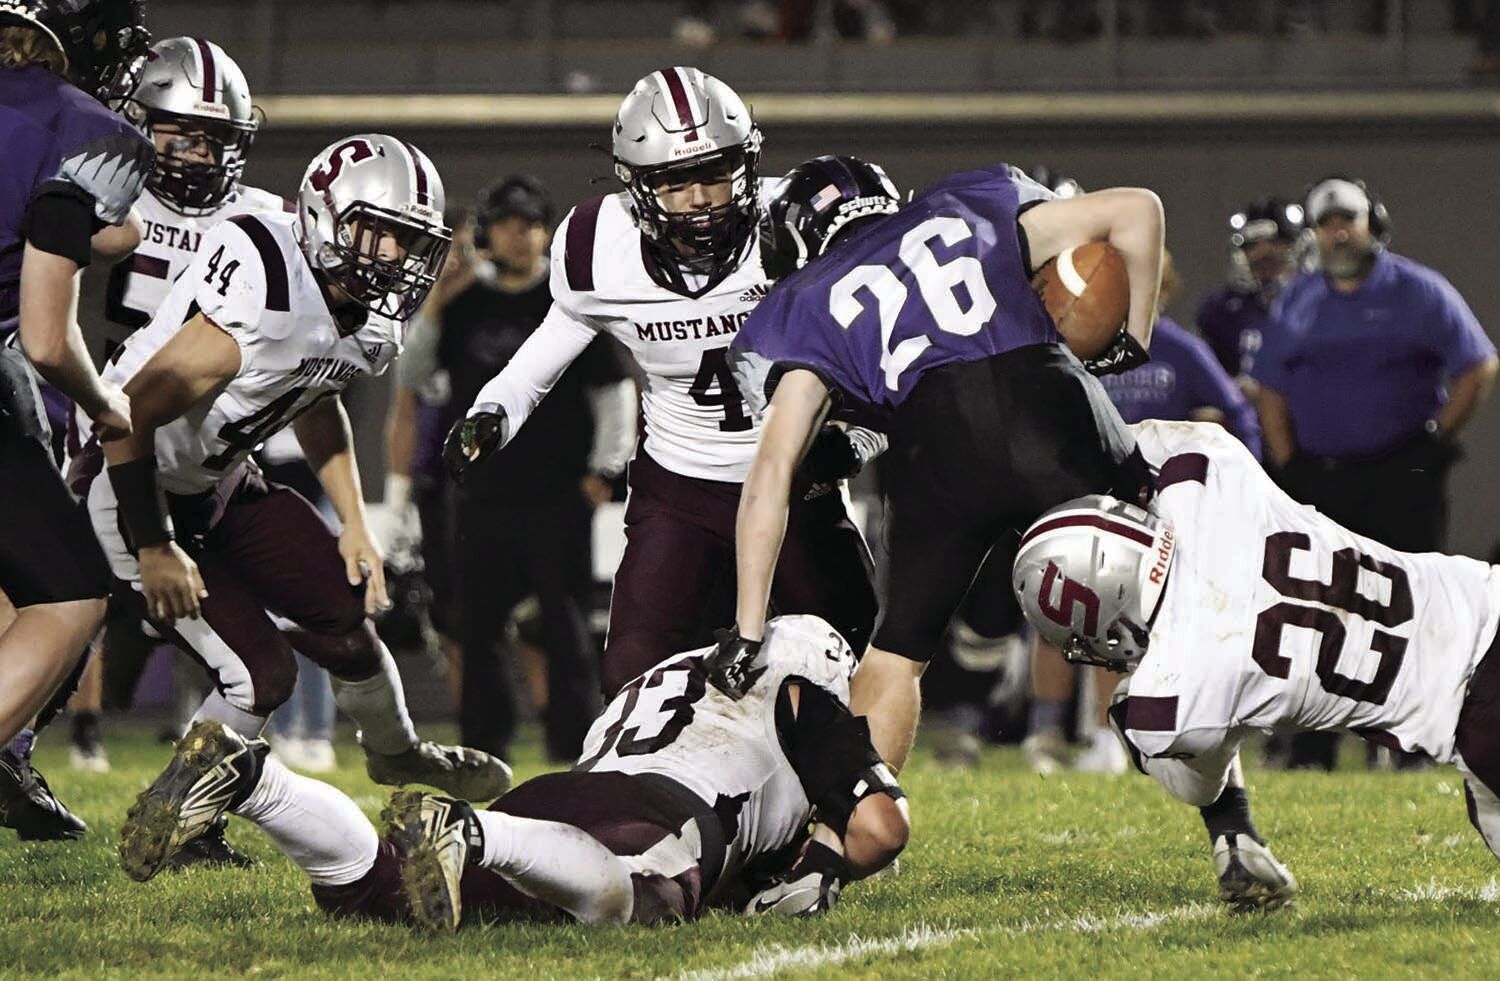 OABCIG dominates Shenandoah in Class 1A playoff, ending their 8-year postseason drought